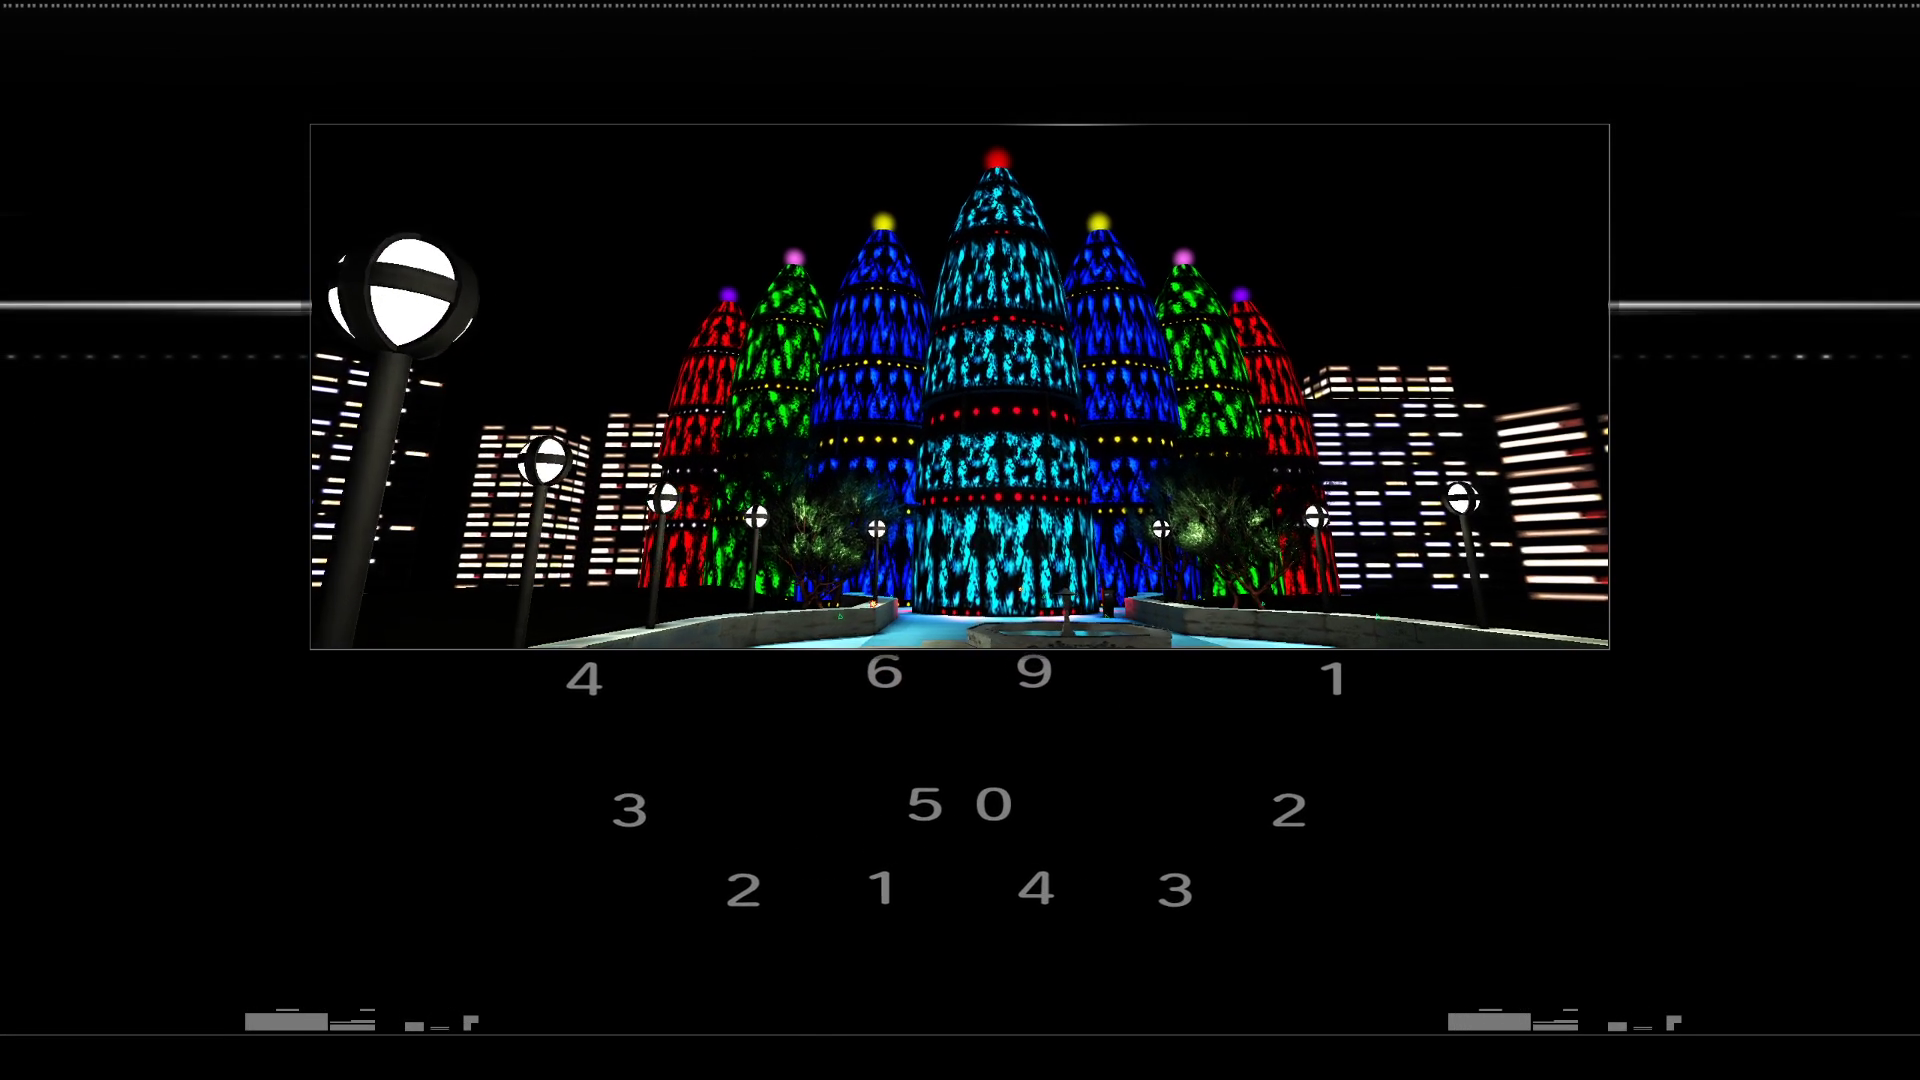 Screenshot from "Decoyman." In the central window are the Triangle Towers, conical buildings resembling Christmas Trees, in a large, dark underground area. The towers are aligned like bowling pins. Each tower bears irregular lights of a single color: teal, blue, green, and red. The front tower is teal, the two in the next row are blue, the three in the next row are green, and the four in the next row are red.